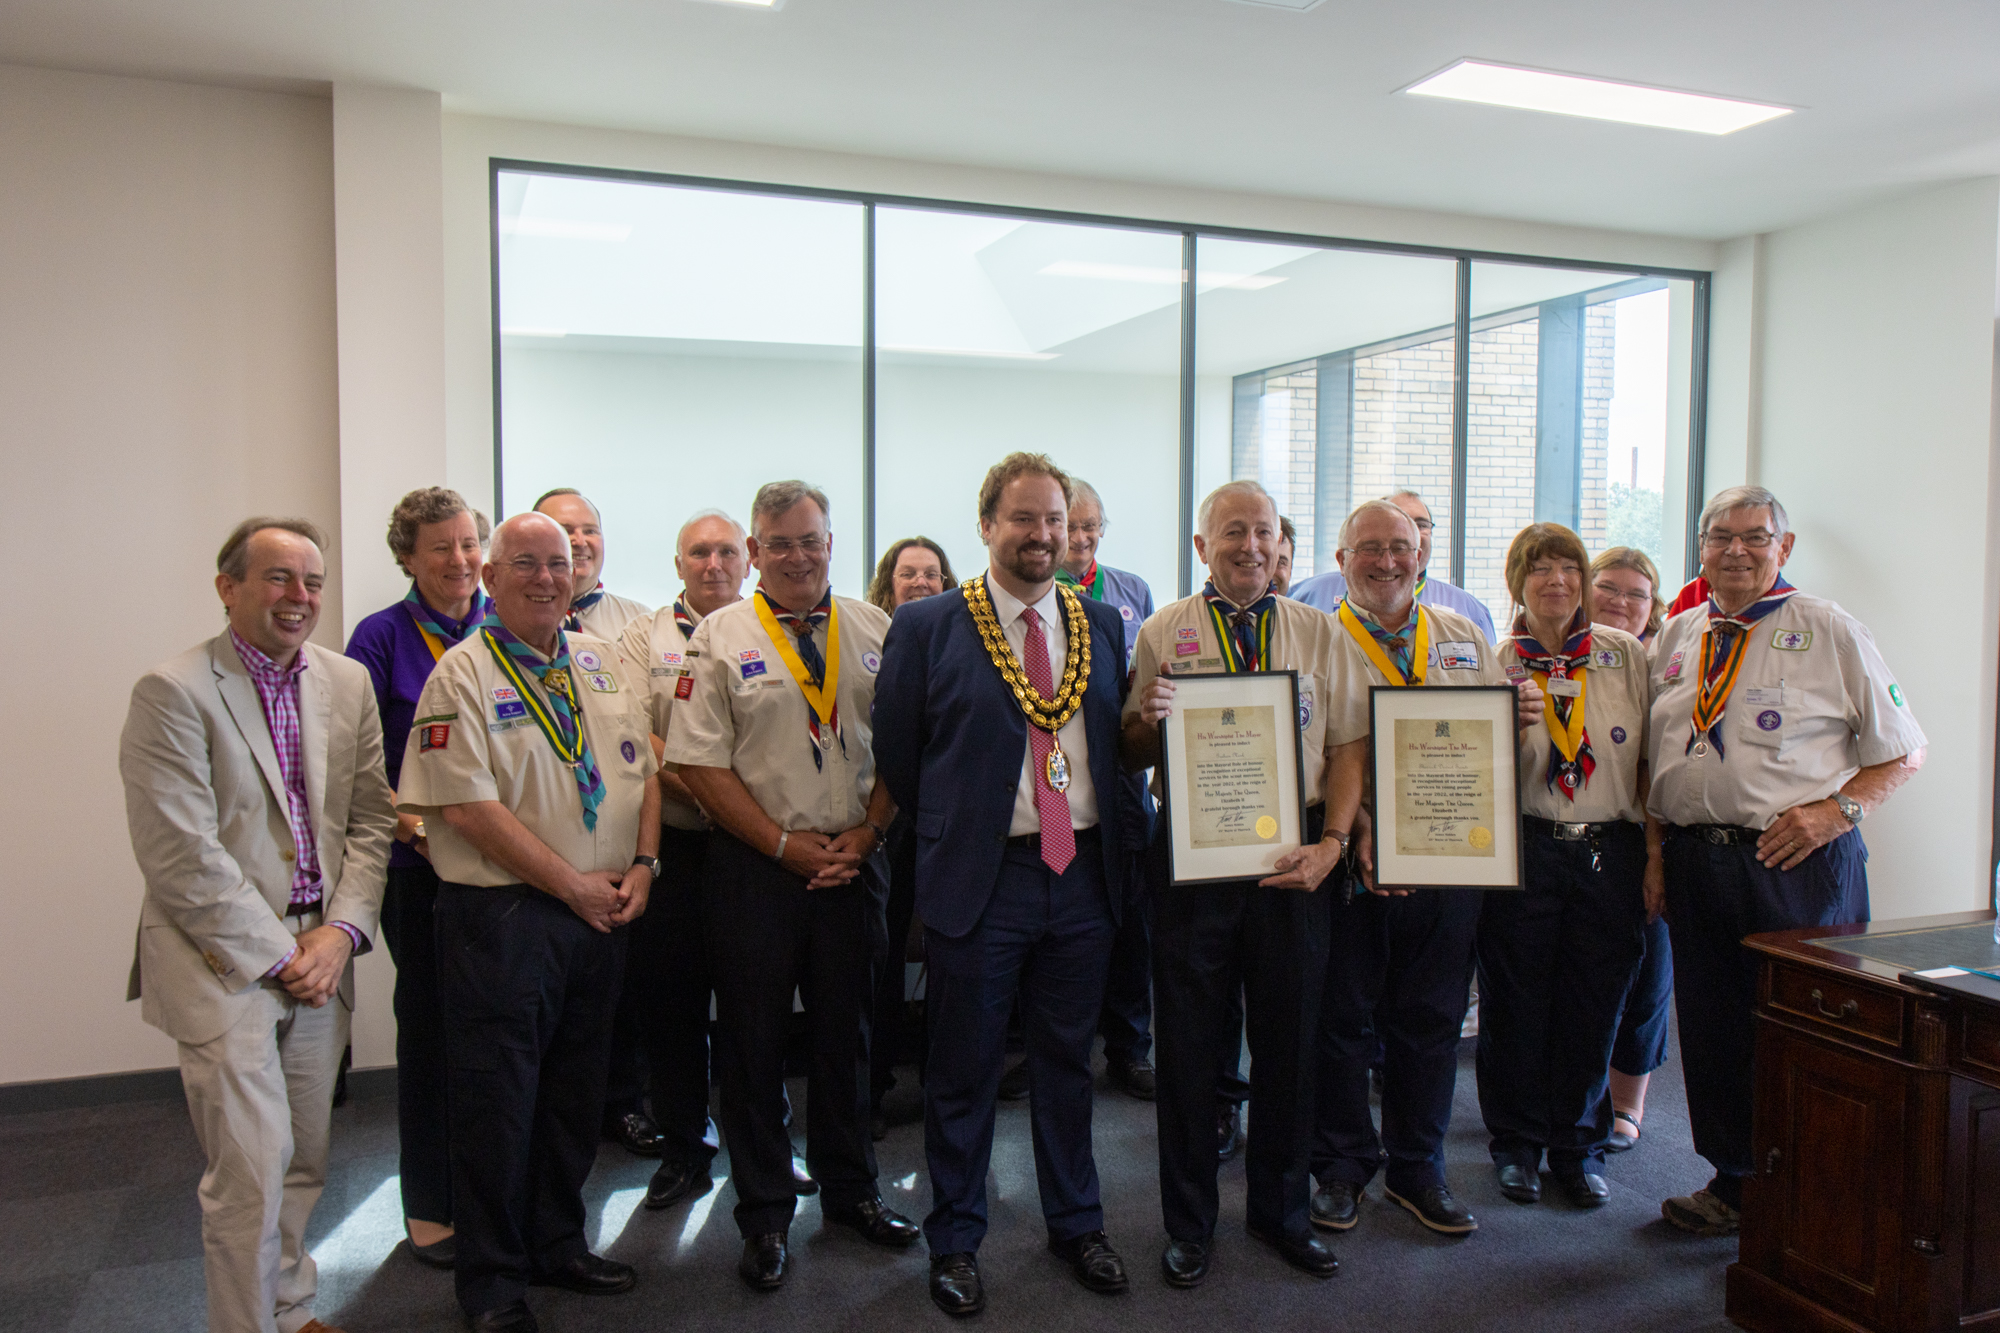 The delegation of Scout volunteers, alongside the mayor and Cllr Mark Coxshall.